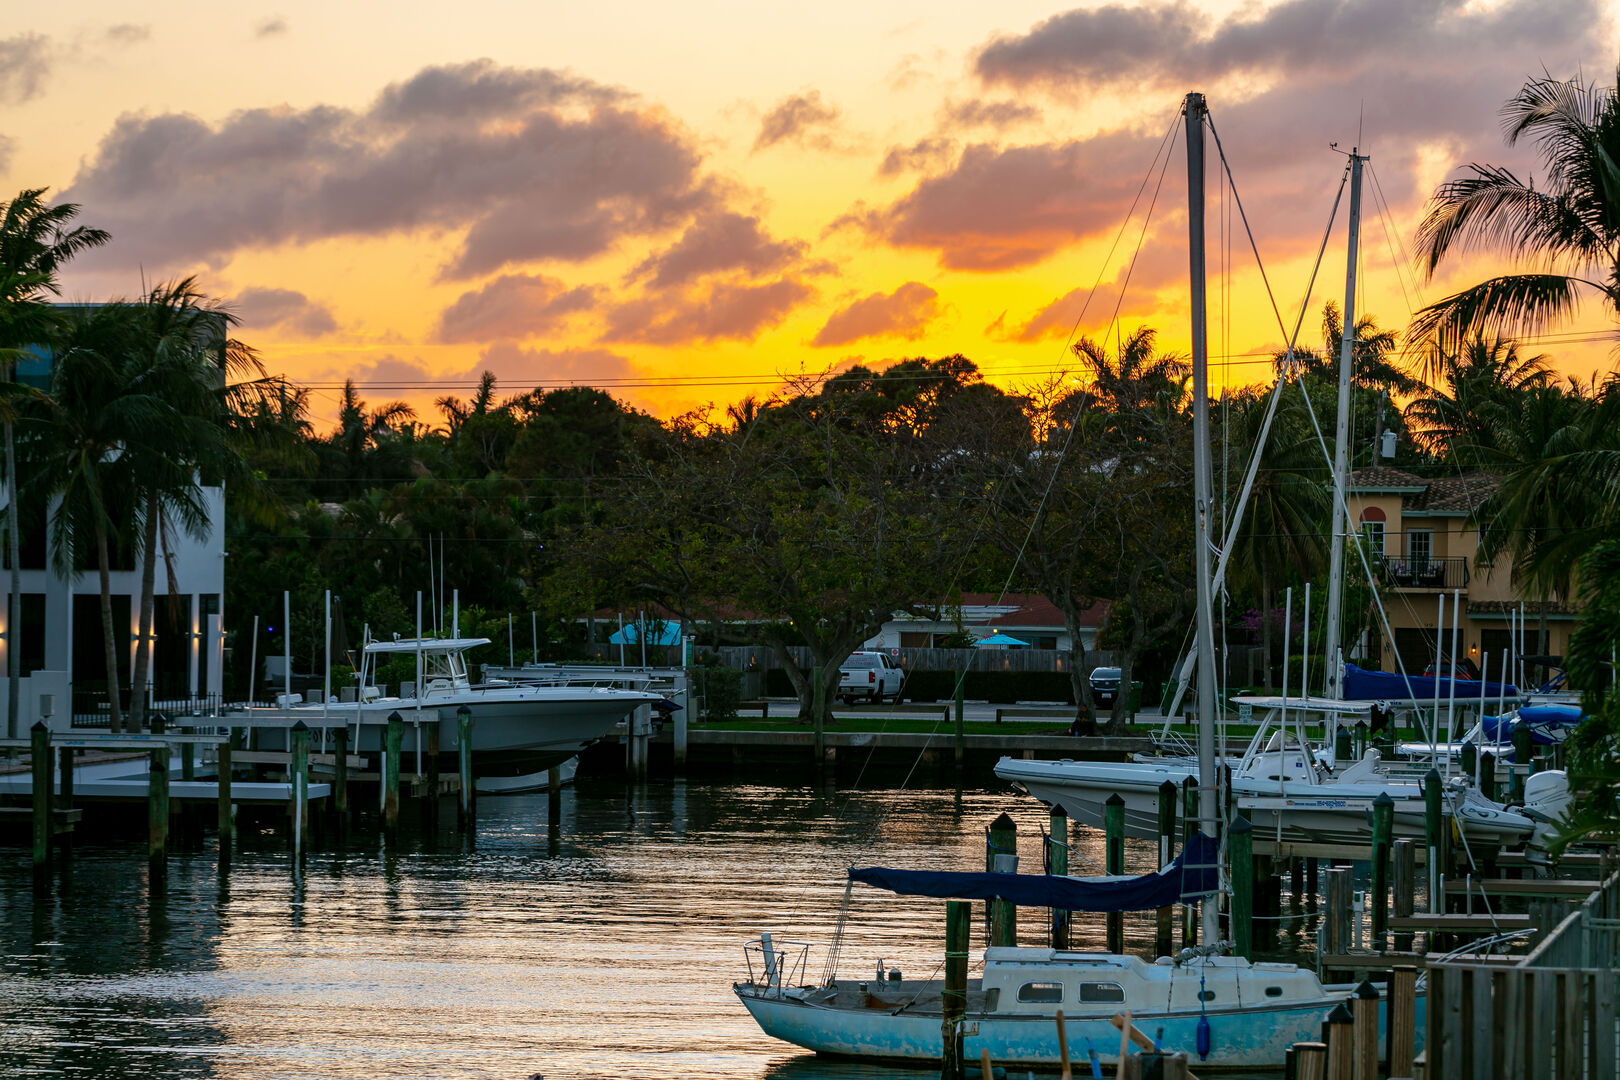 Evening at  Salt Aire Key are awash with color!